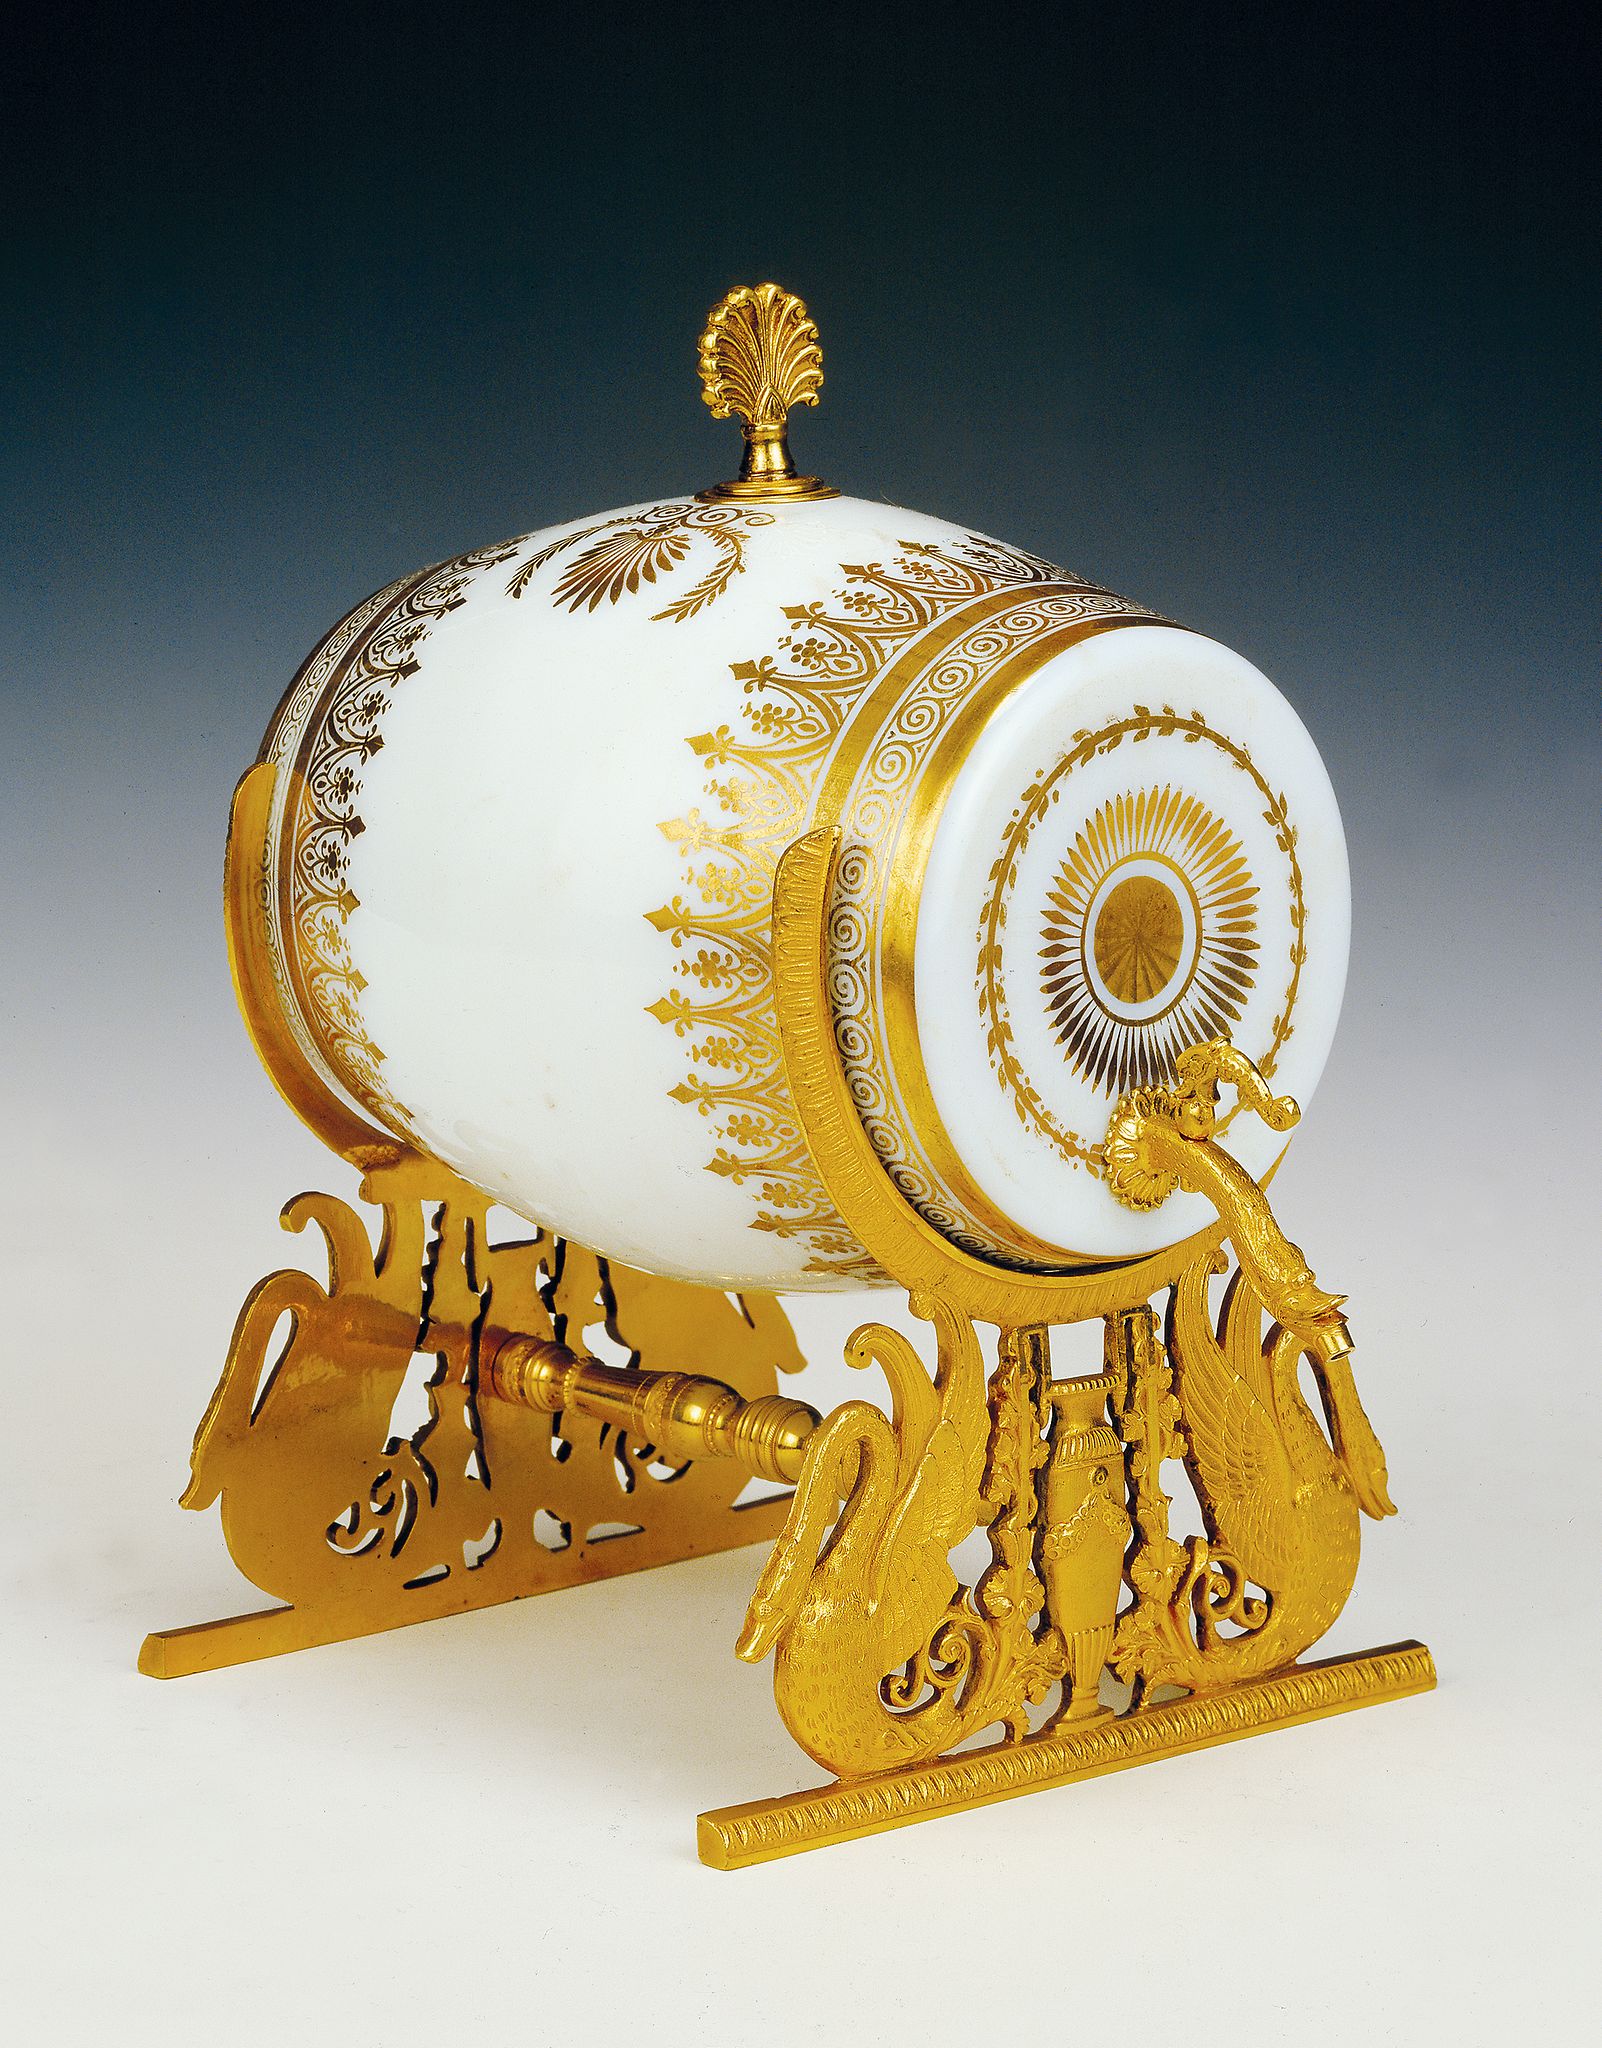 An Early 19th Century French Ormolu Mounted Opaline Spirit Barrel the ormolu base decorated with